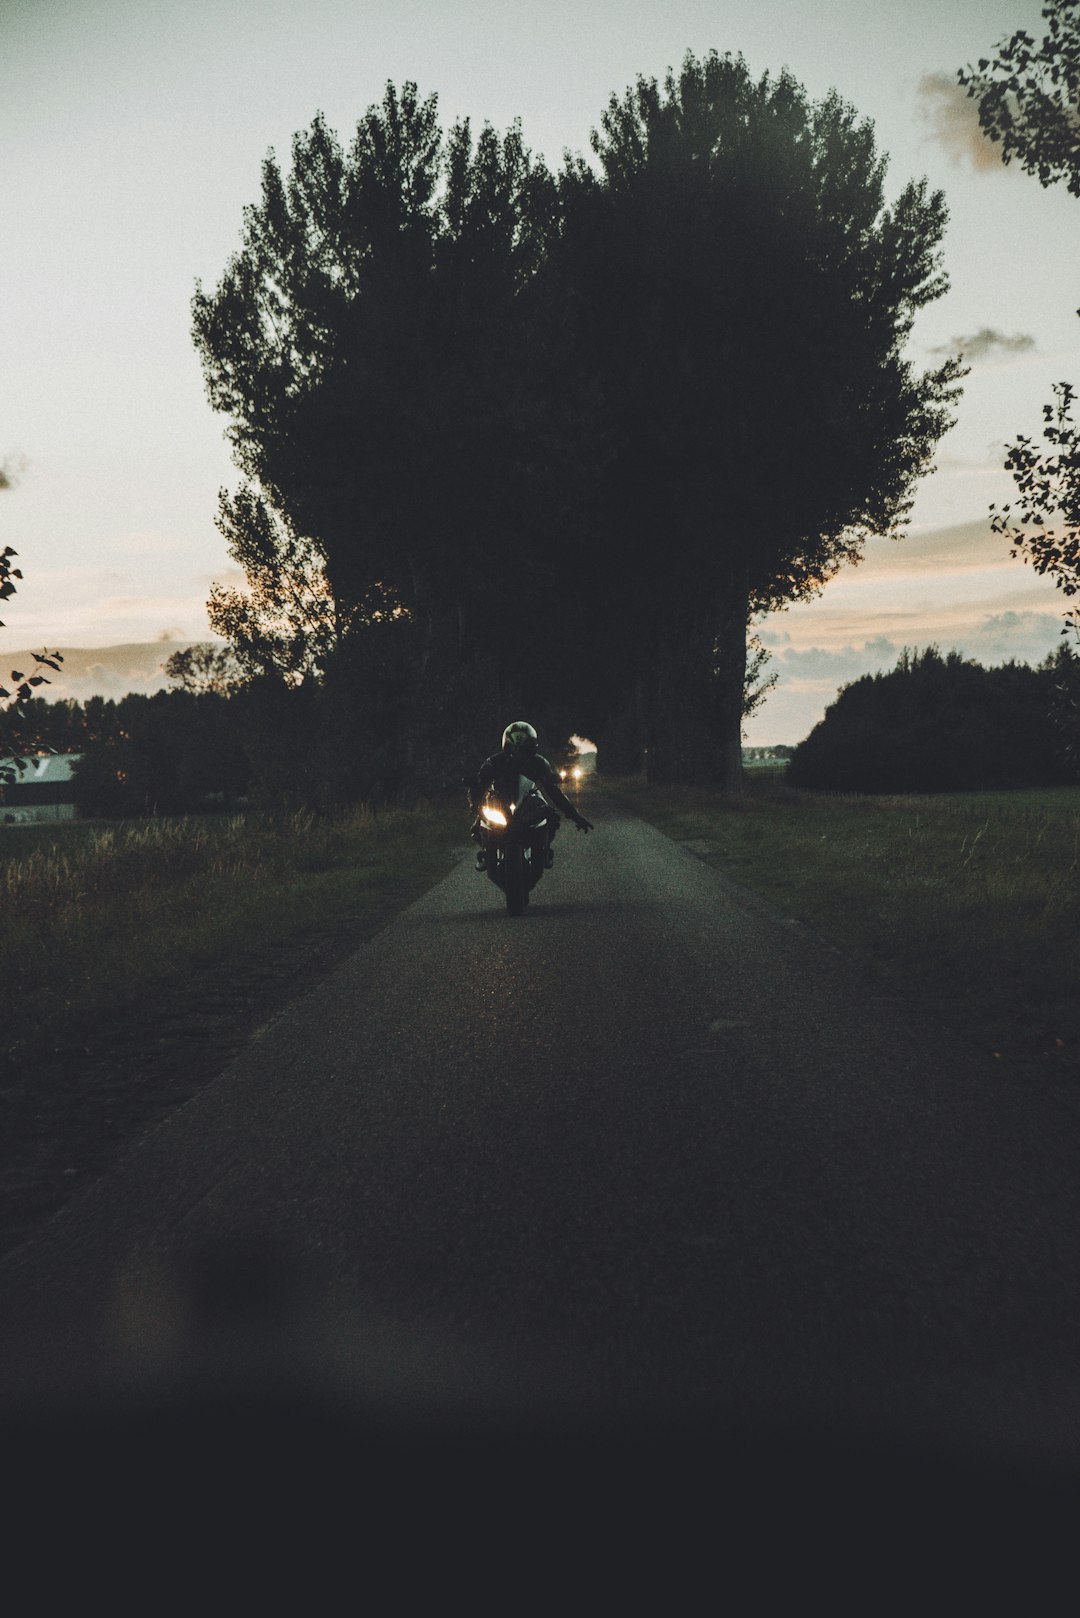 man riding motorcycle on road during sunset